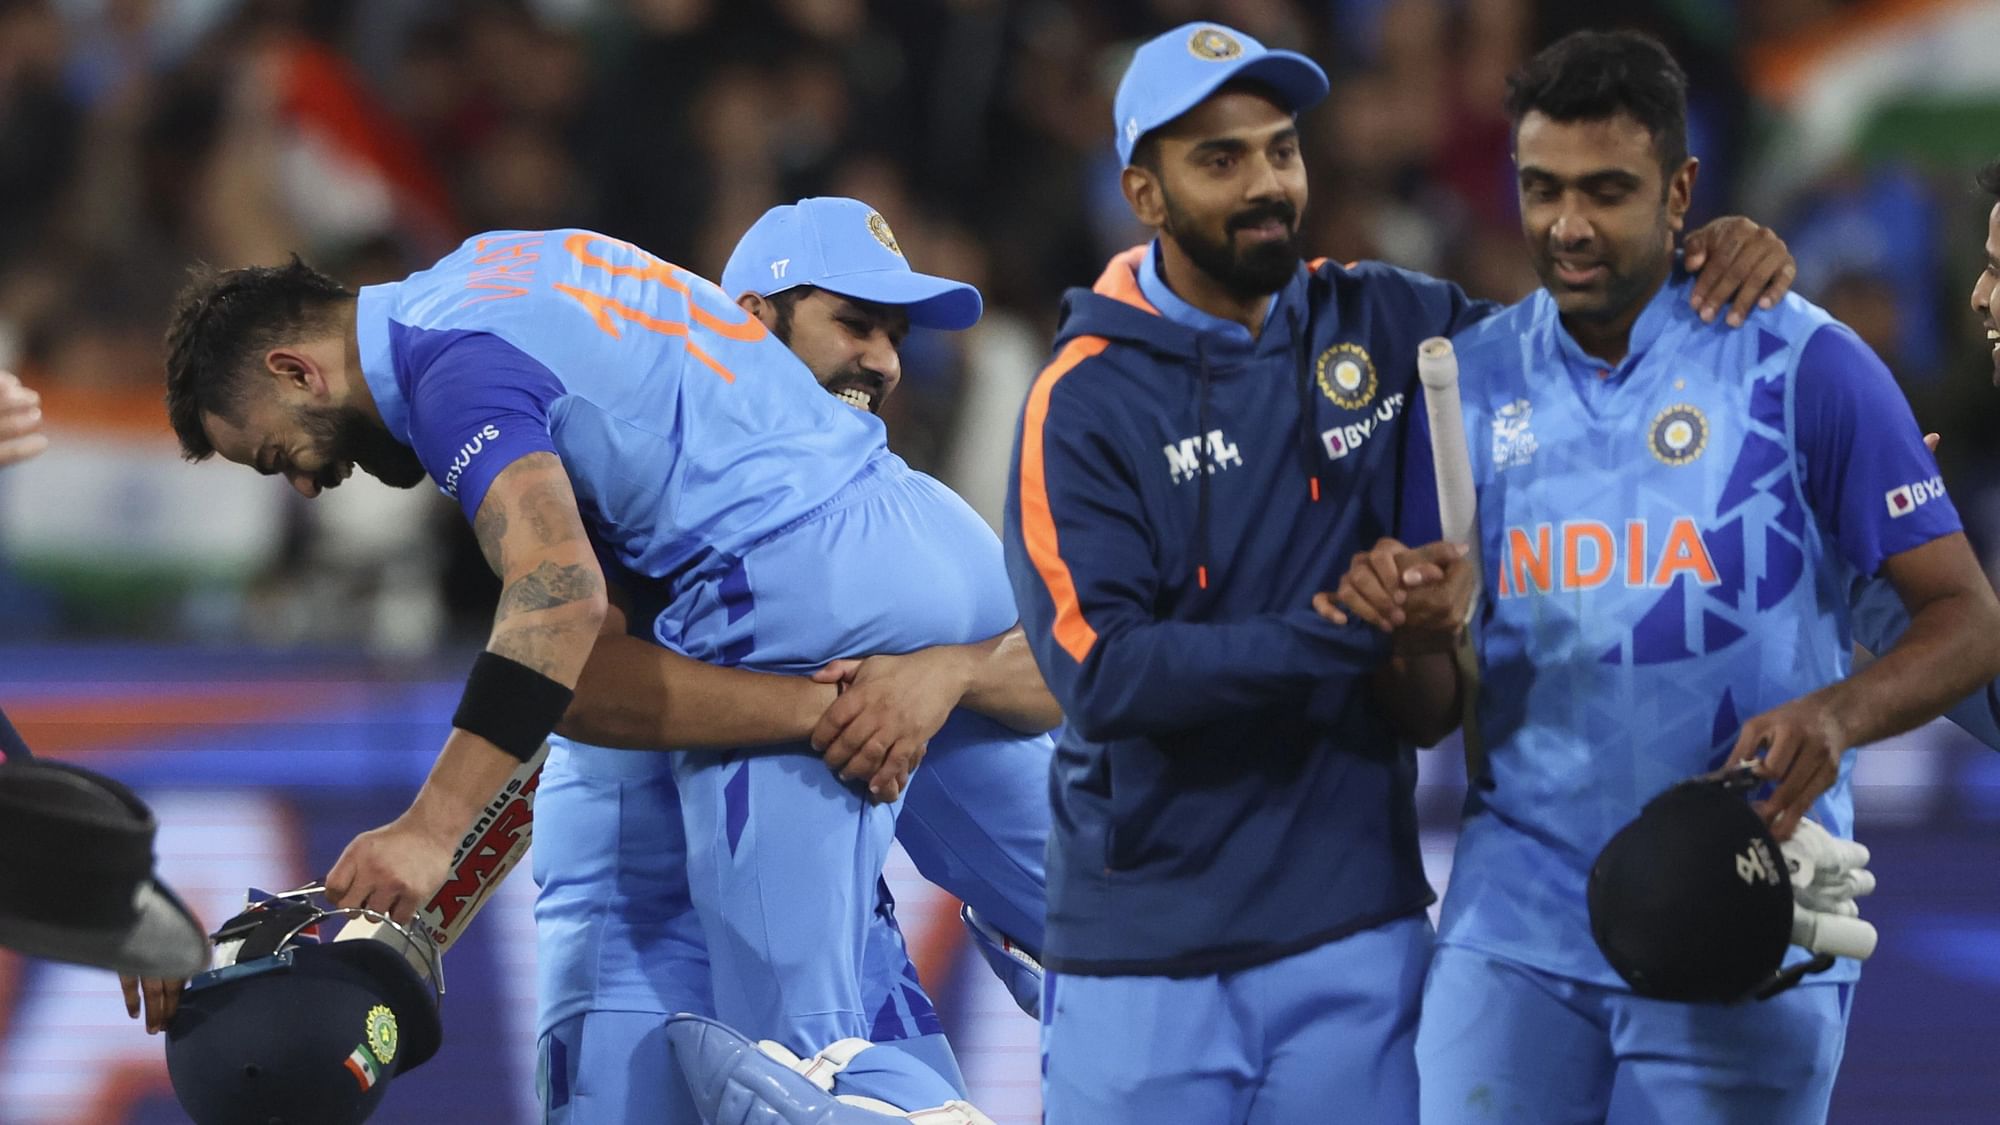 <div class="paragraphs"><p>The Indian players celebrate after their victory against Pakistan in the T20 World Cup Super 12 match at the MCG on Sunday.&nbsp;</p></div>